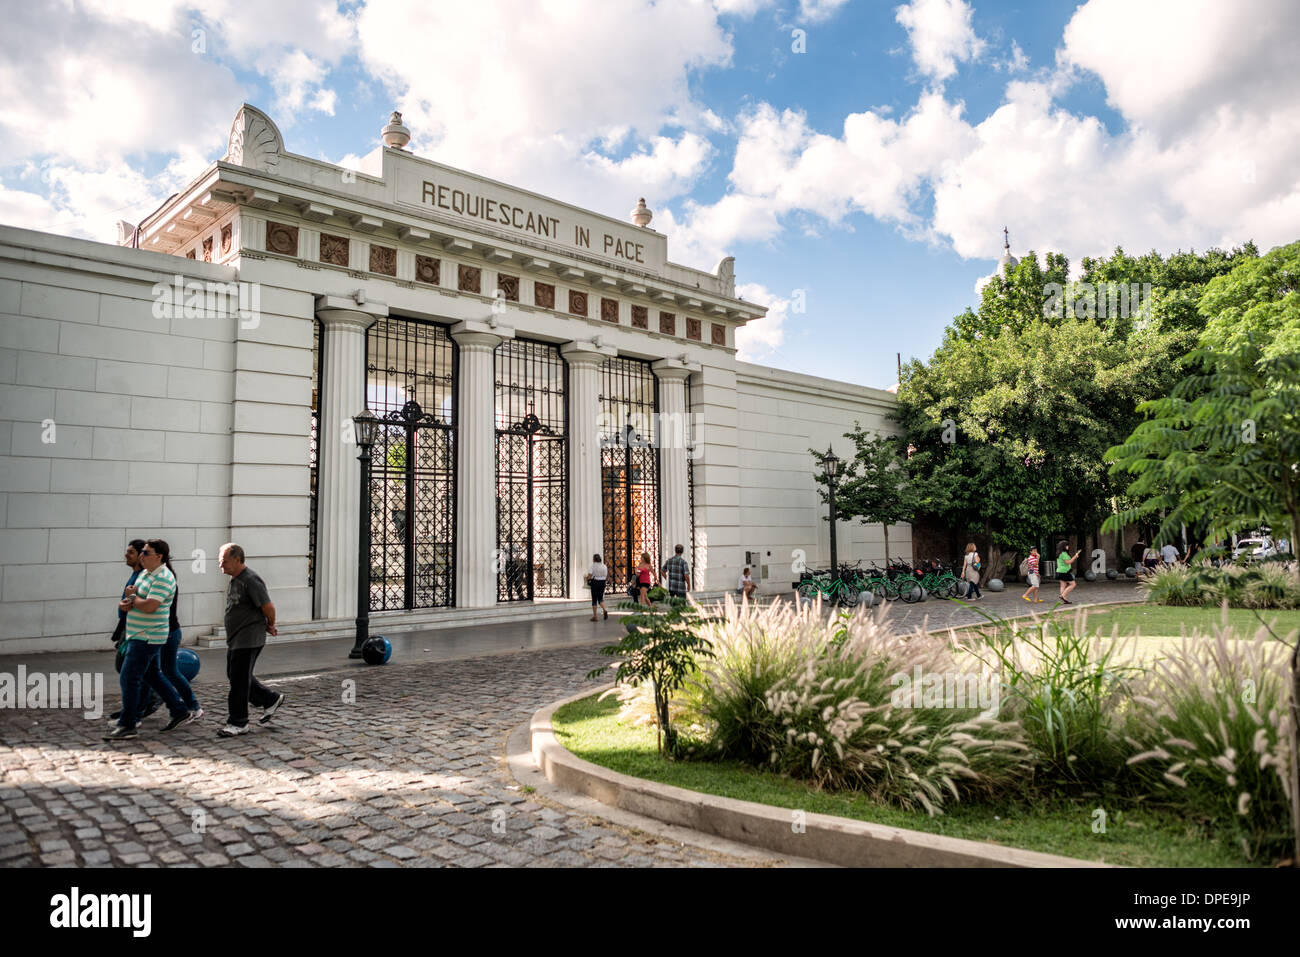 BUENOS AIRES, Argentina - The cemetery features above-ground gravesites and crypts and is organized into a series of streets and boulevards. Stock Photo